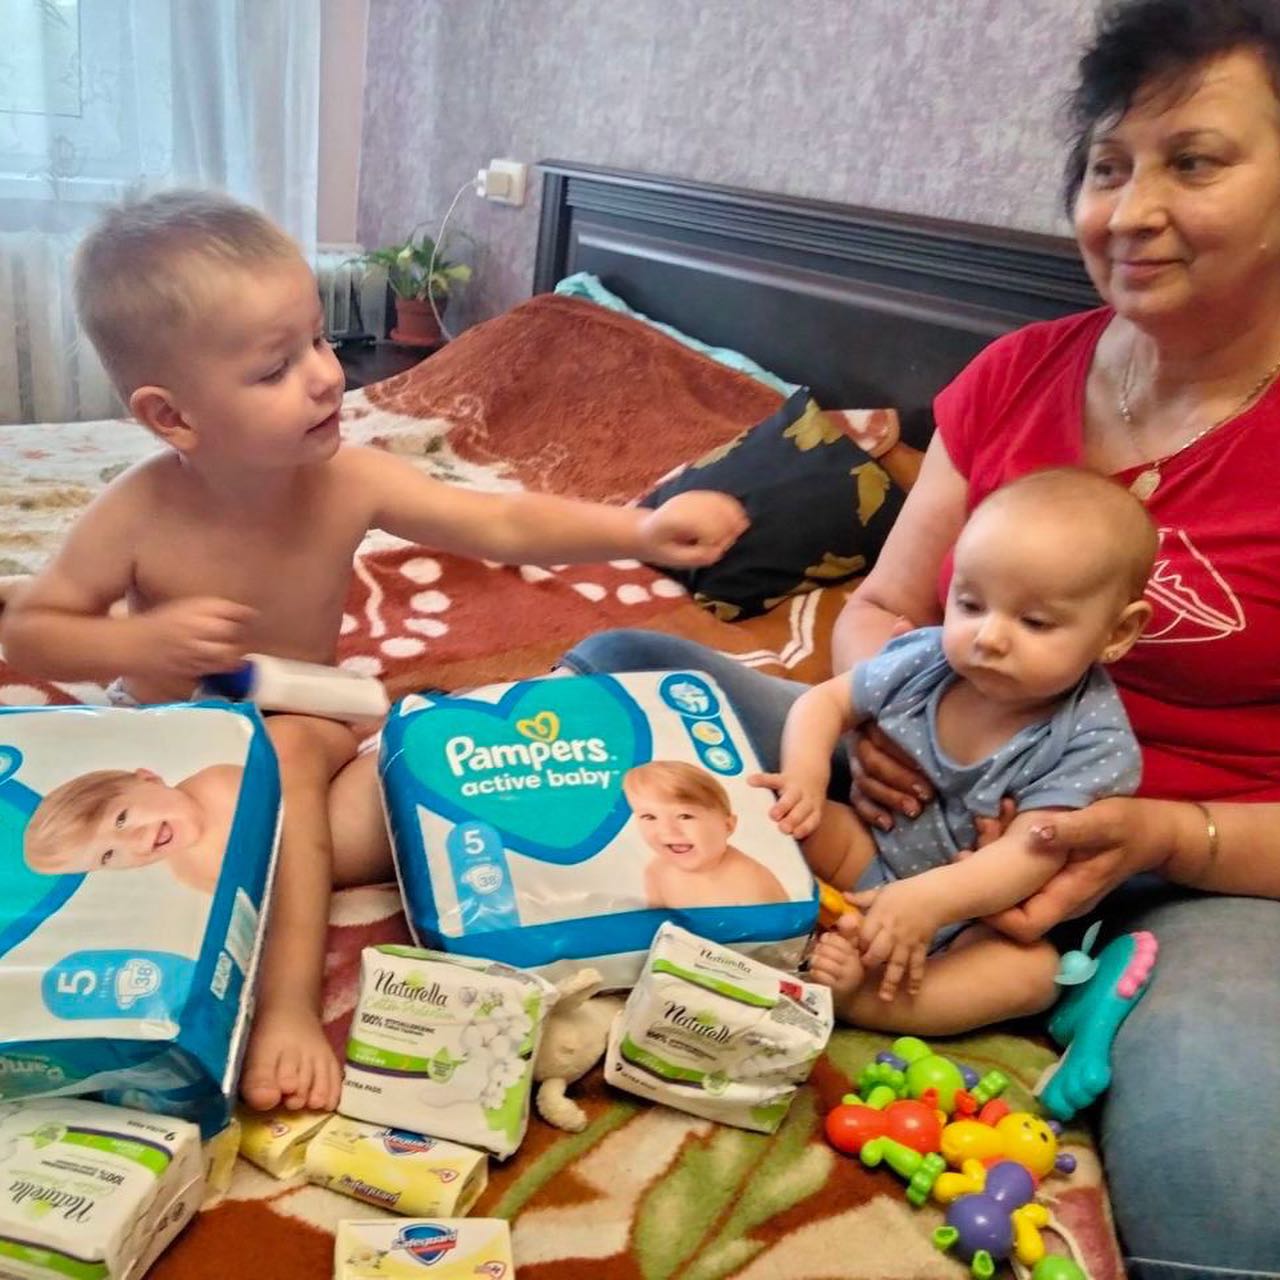 A woman and two children sitting on a bed with packs of pampers diapers.